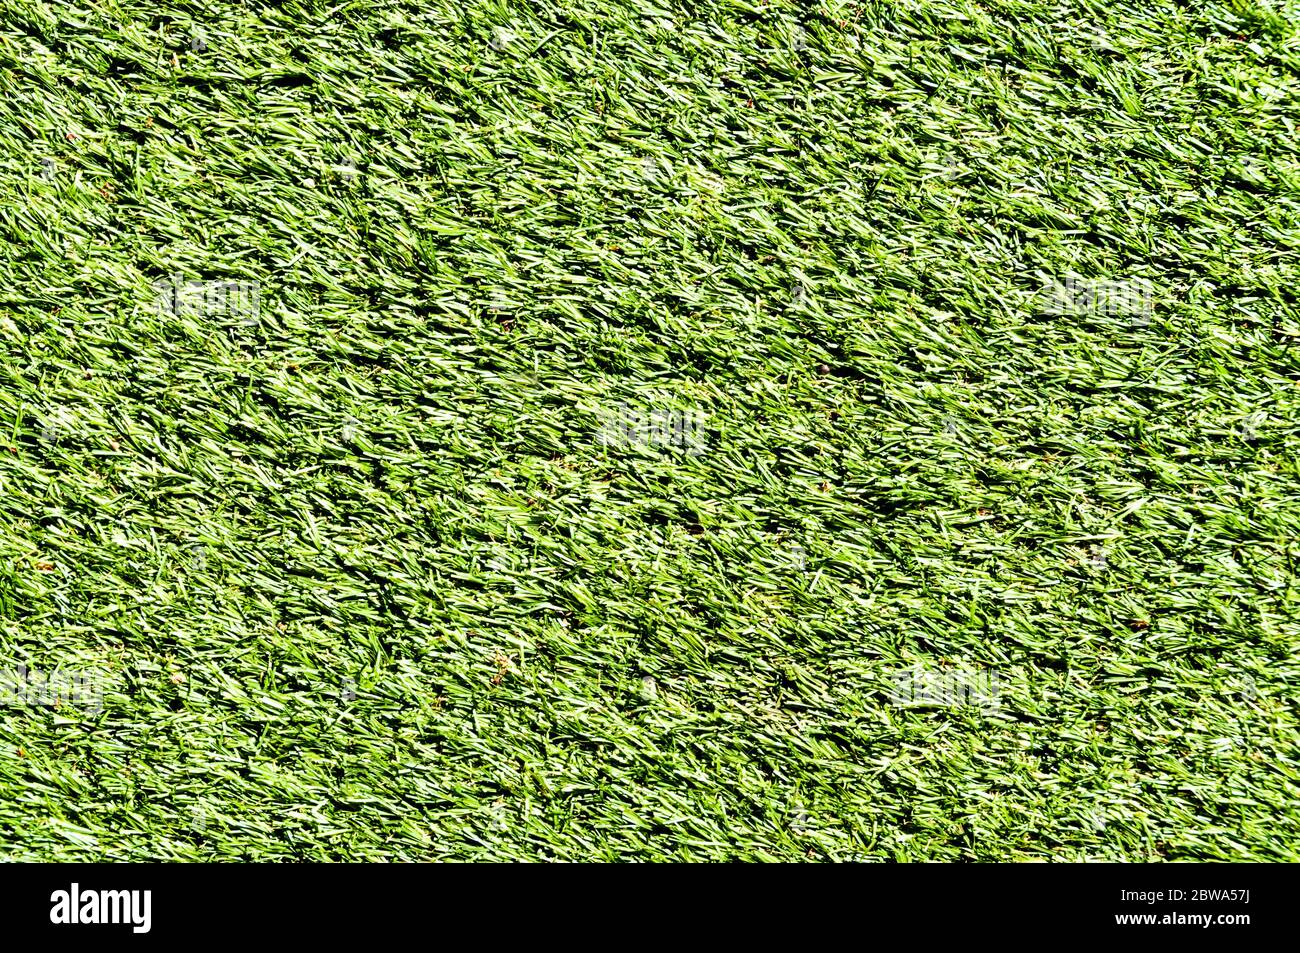 Close up view of an area of artificial grass or astroturf. Stock Photo